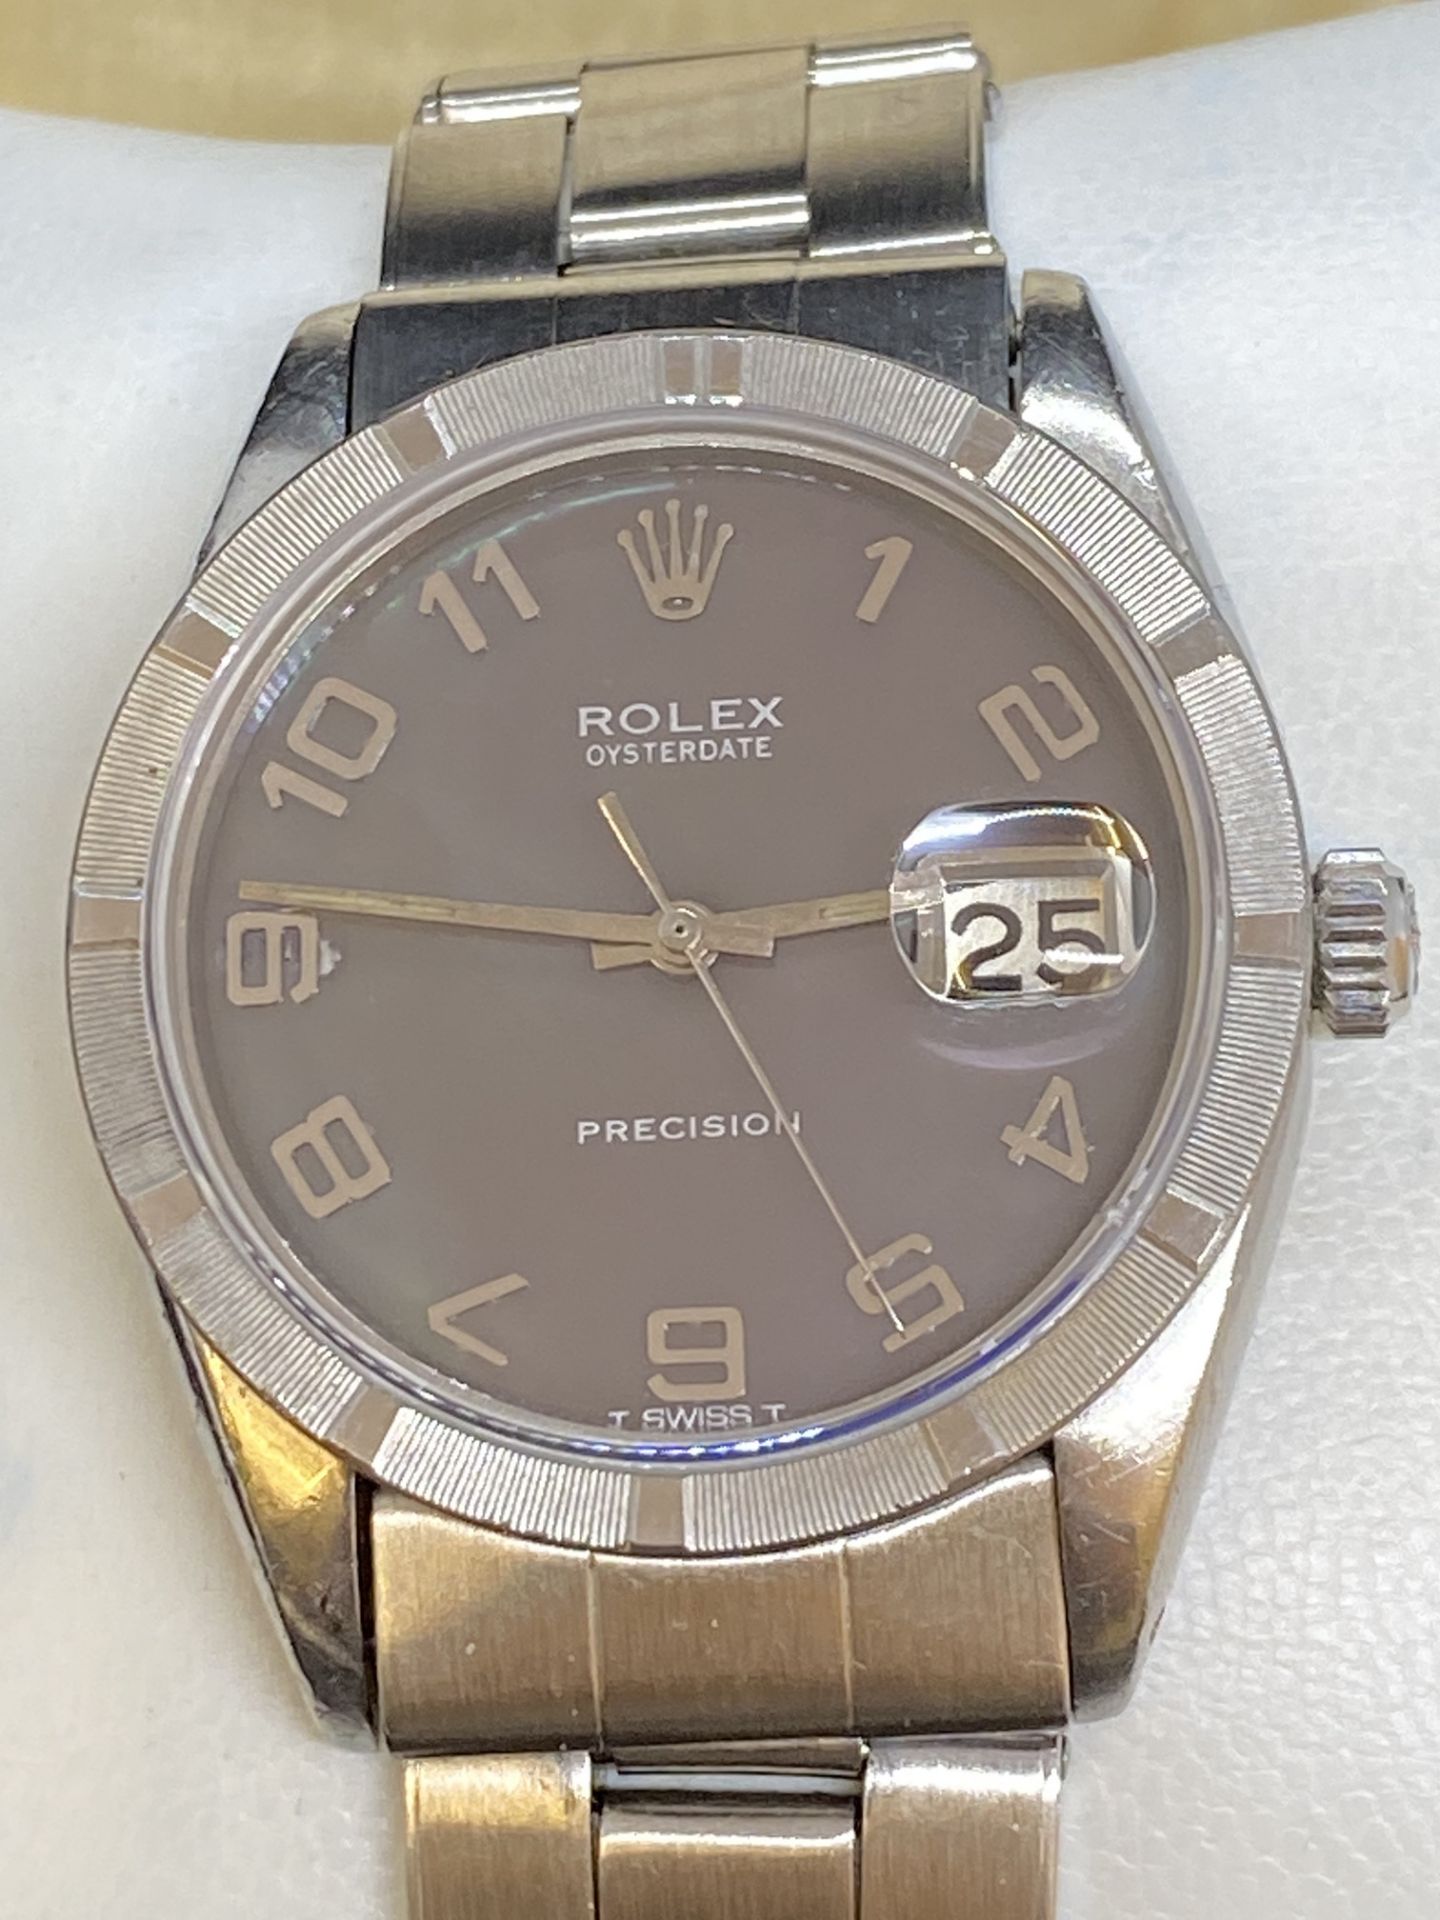 ROLEX OYSTERDATE PRECISION WATCH - Image 2 of 15